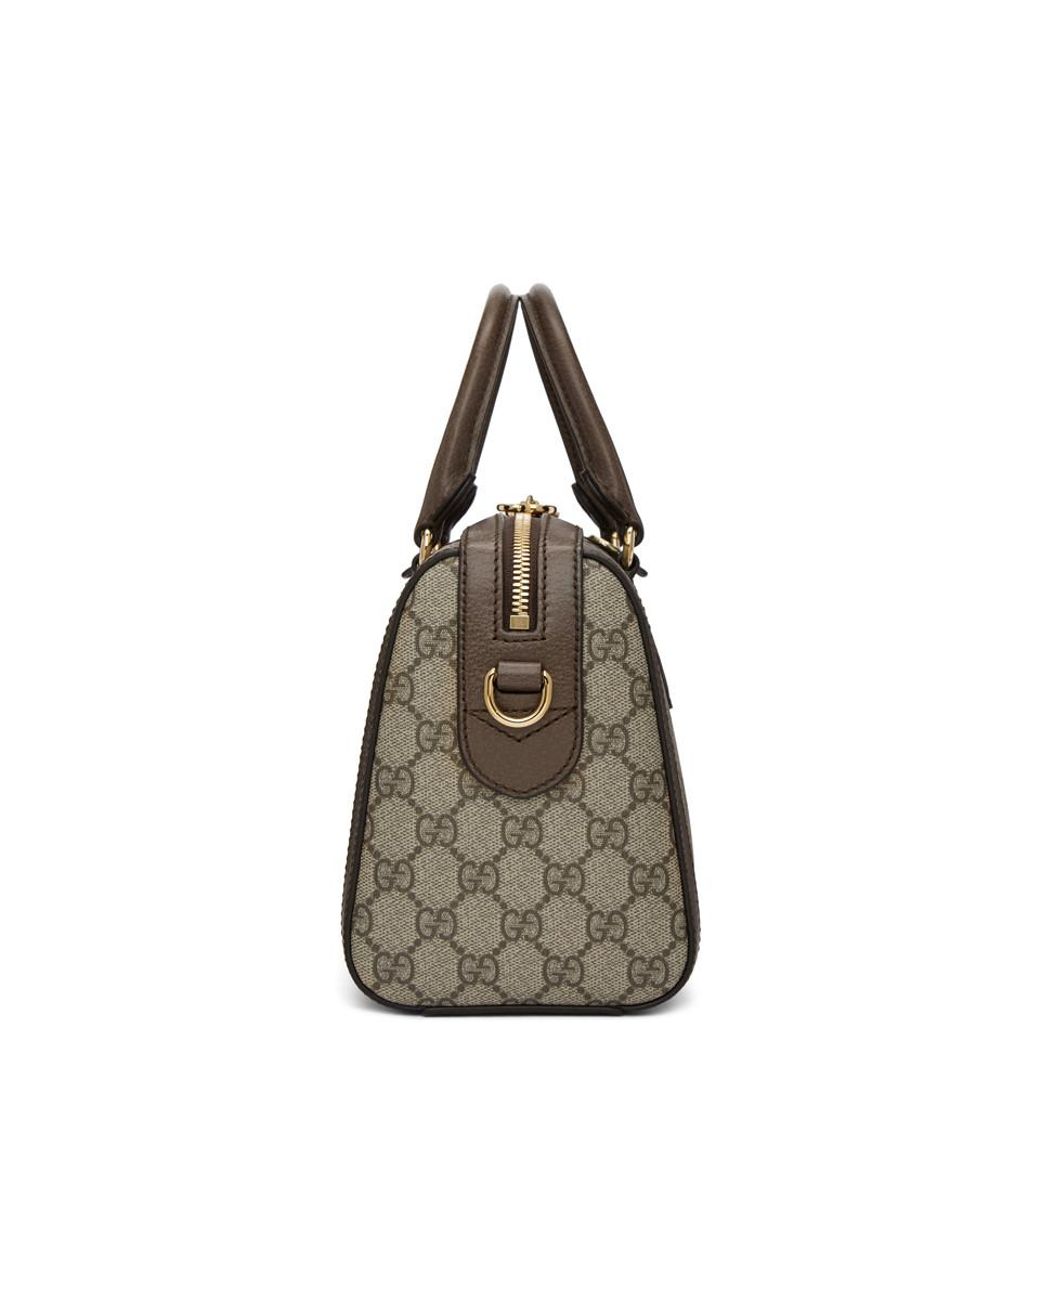 Ophidia gg supreme leather handbag Gucci Beige in Leather - 33886066